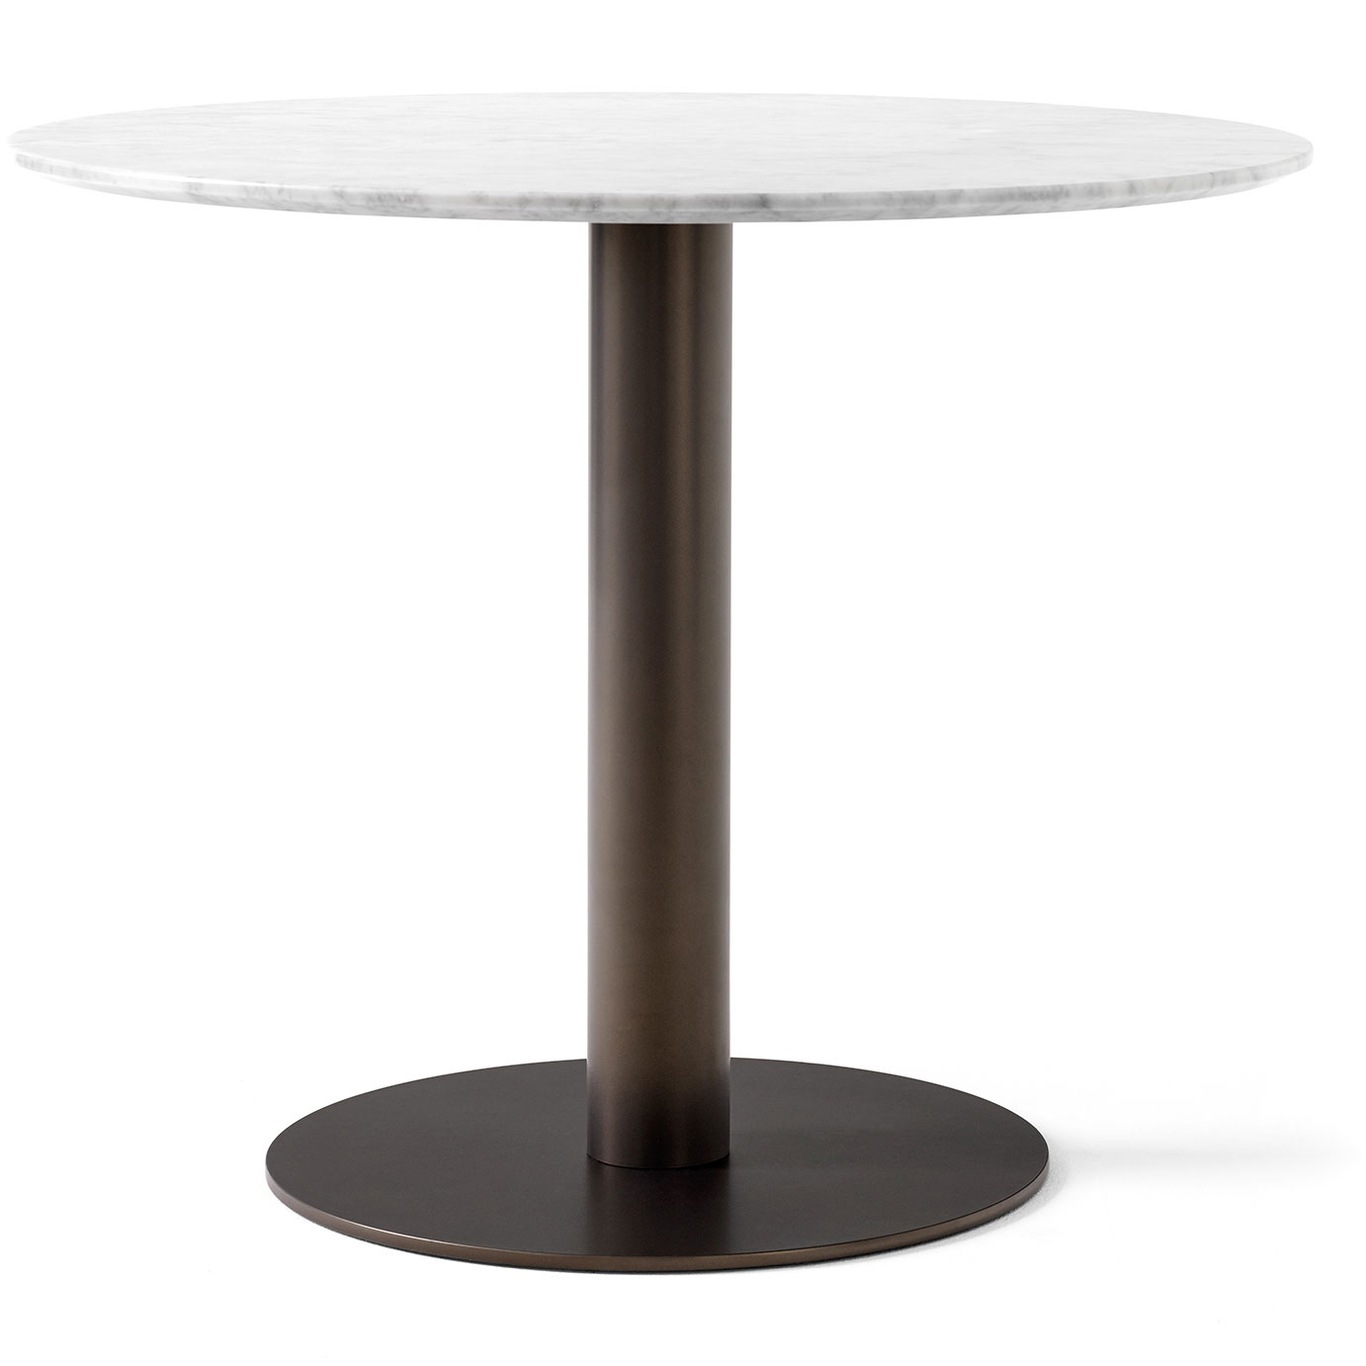 In between SK18 Table 90cm, White Marble / Bronzed